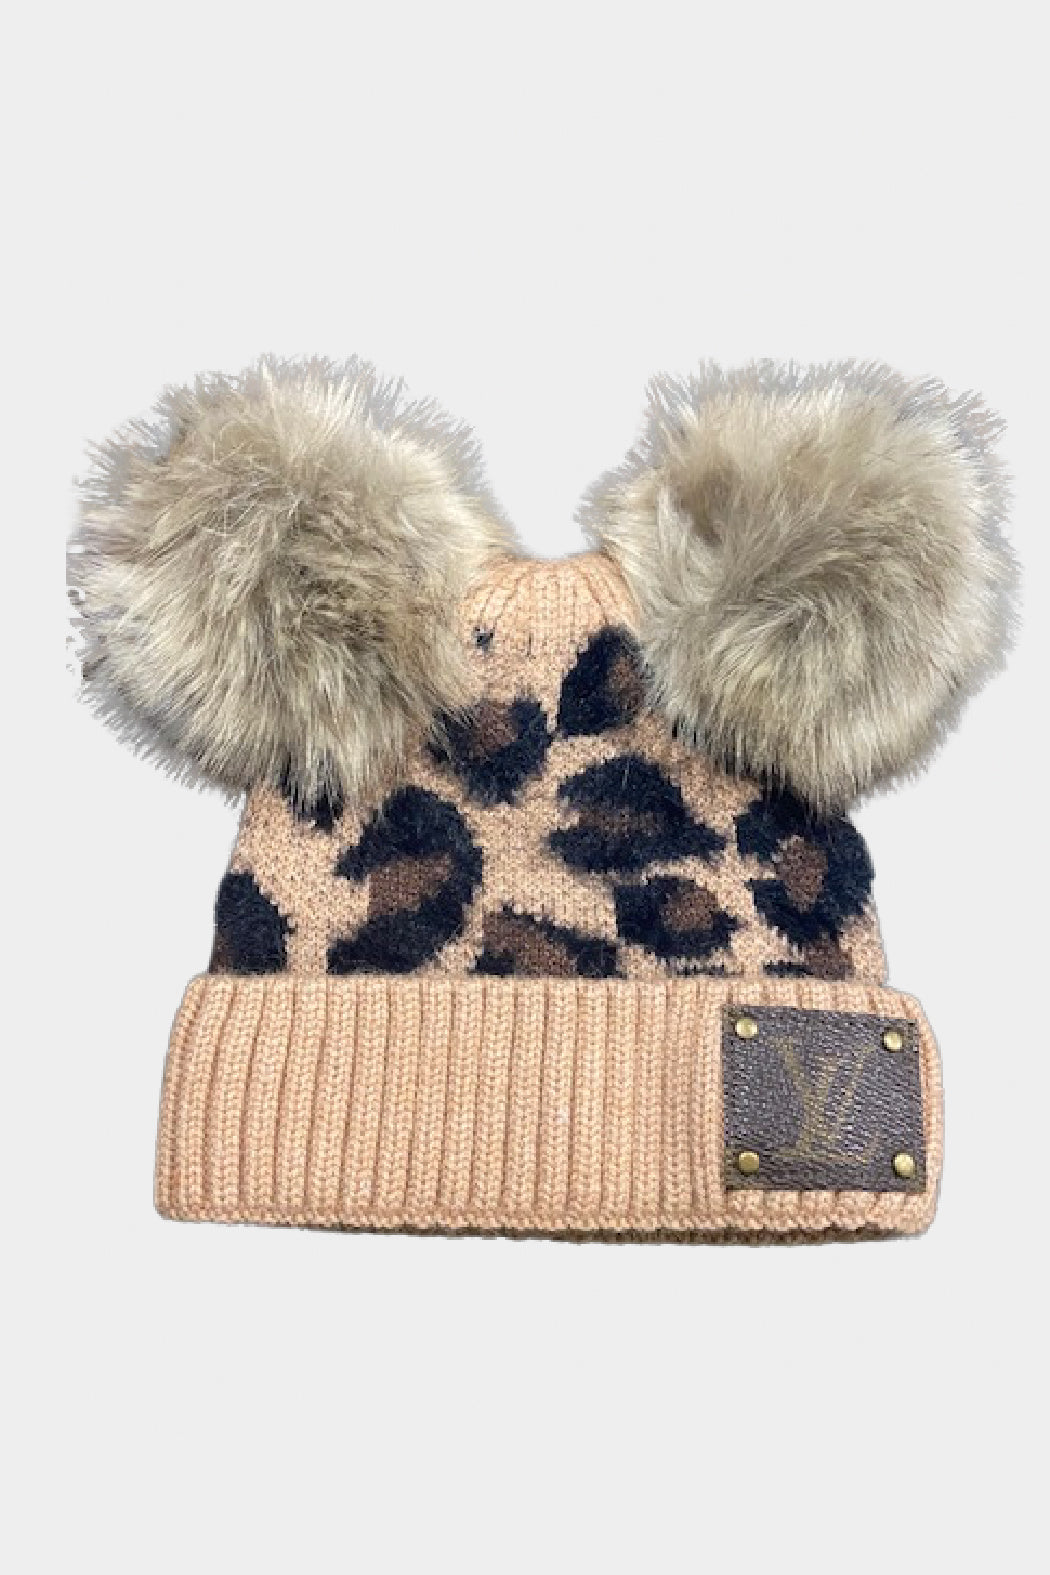 Upcycled Leopard Baby Beanie